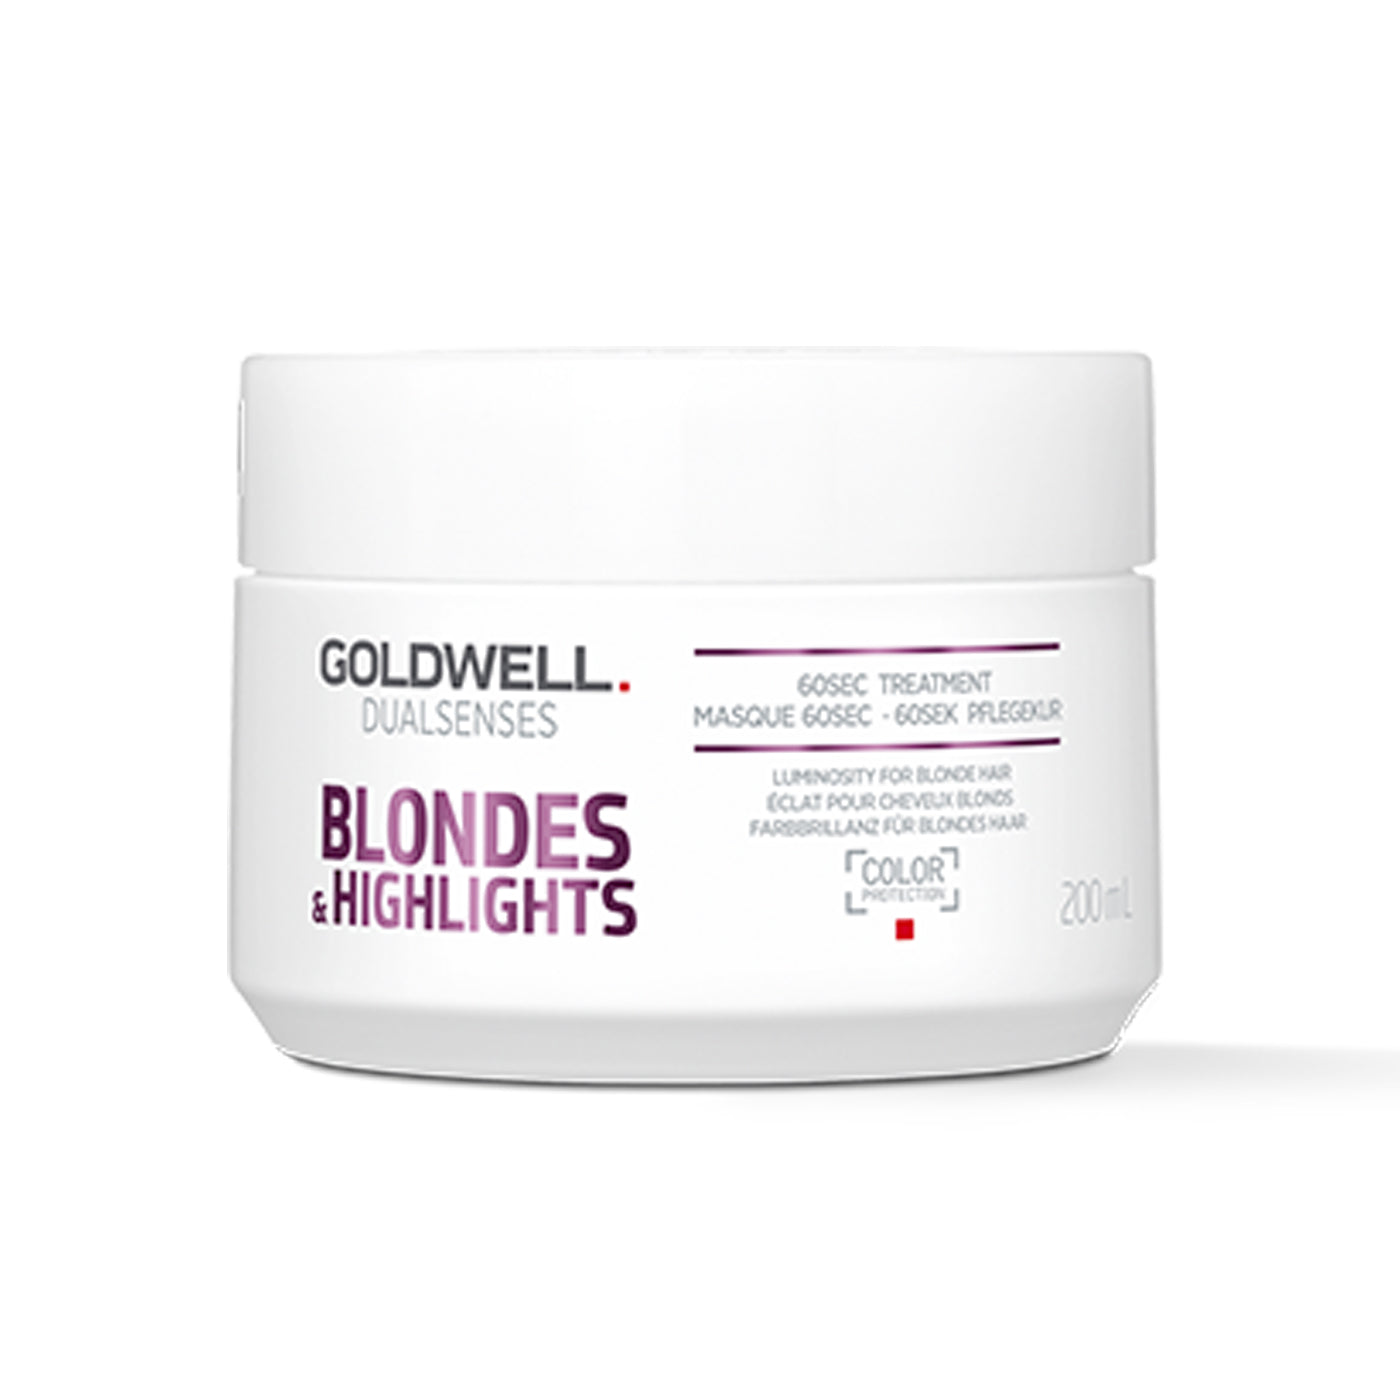 Goldwell DualSenses Color Blondes & Highlights 60 second Treatment (200ml) - Ultimate Hair and Beauty